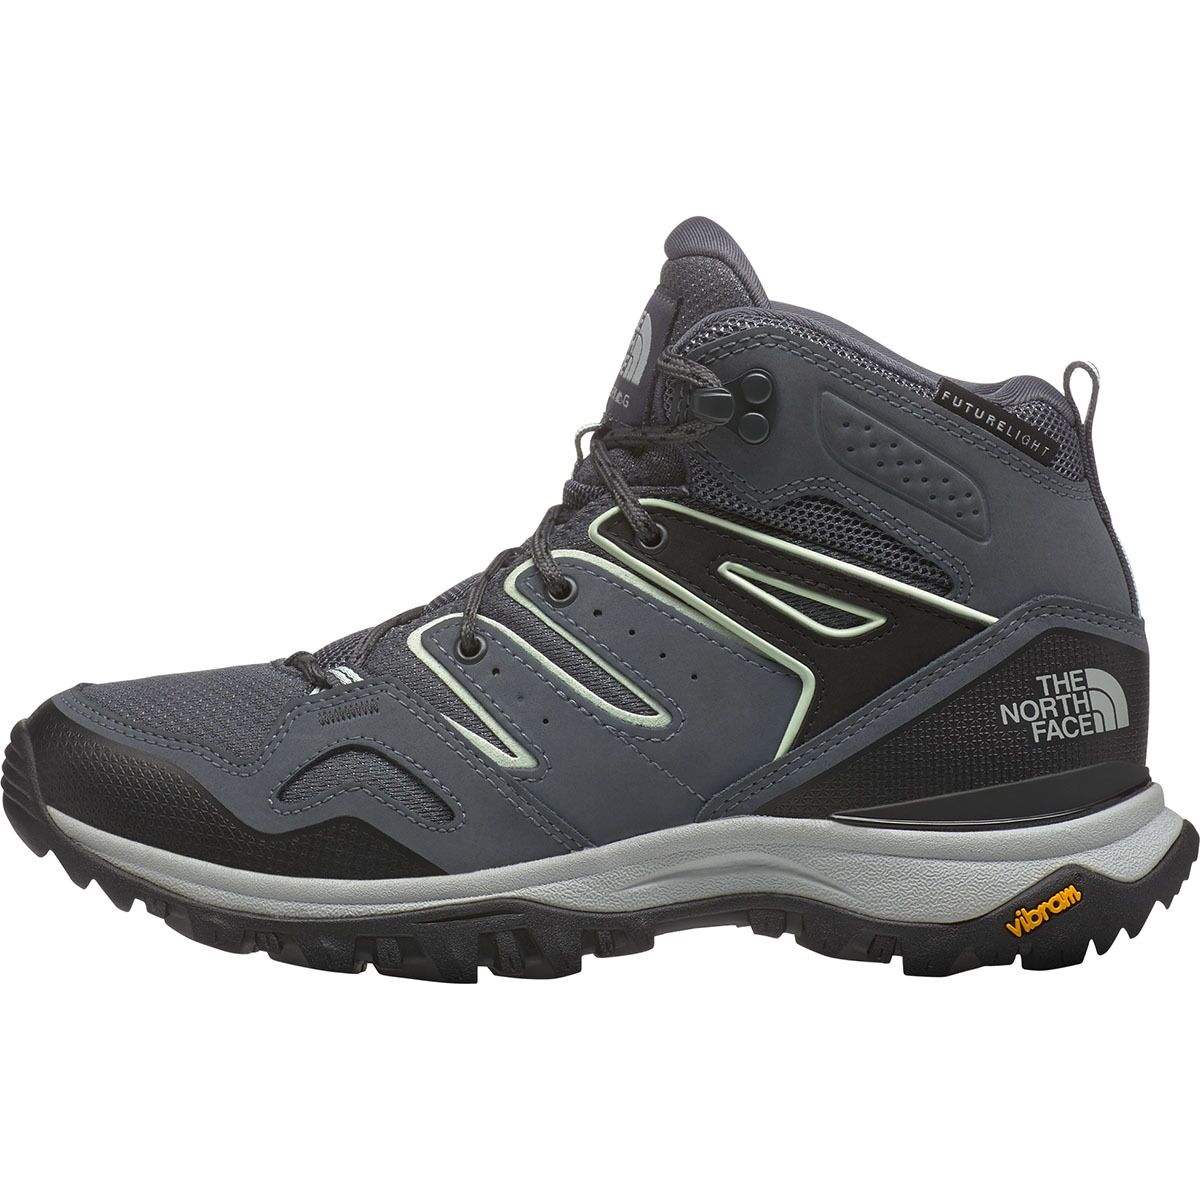 The North Face Hedgehog Mid FUTURELIGHT Hiking Boot - Women's - Footwear